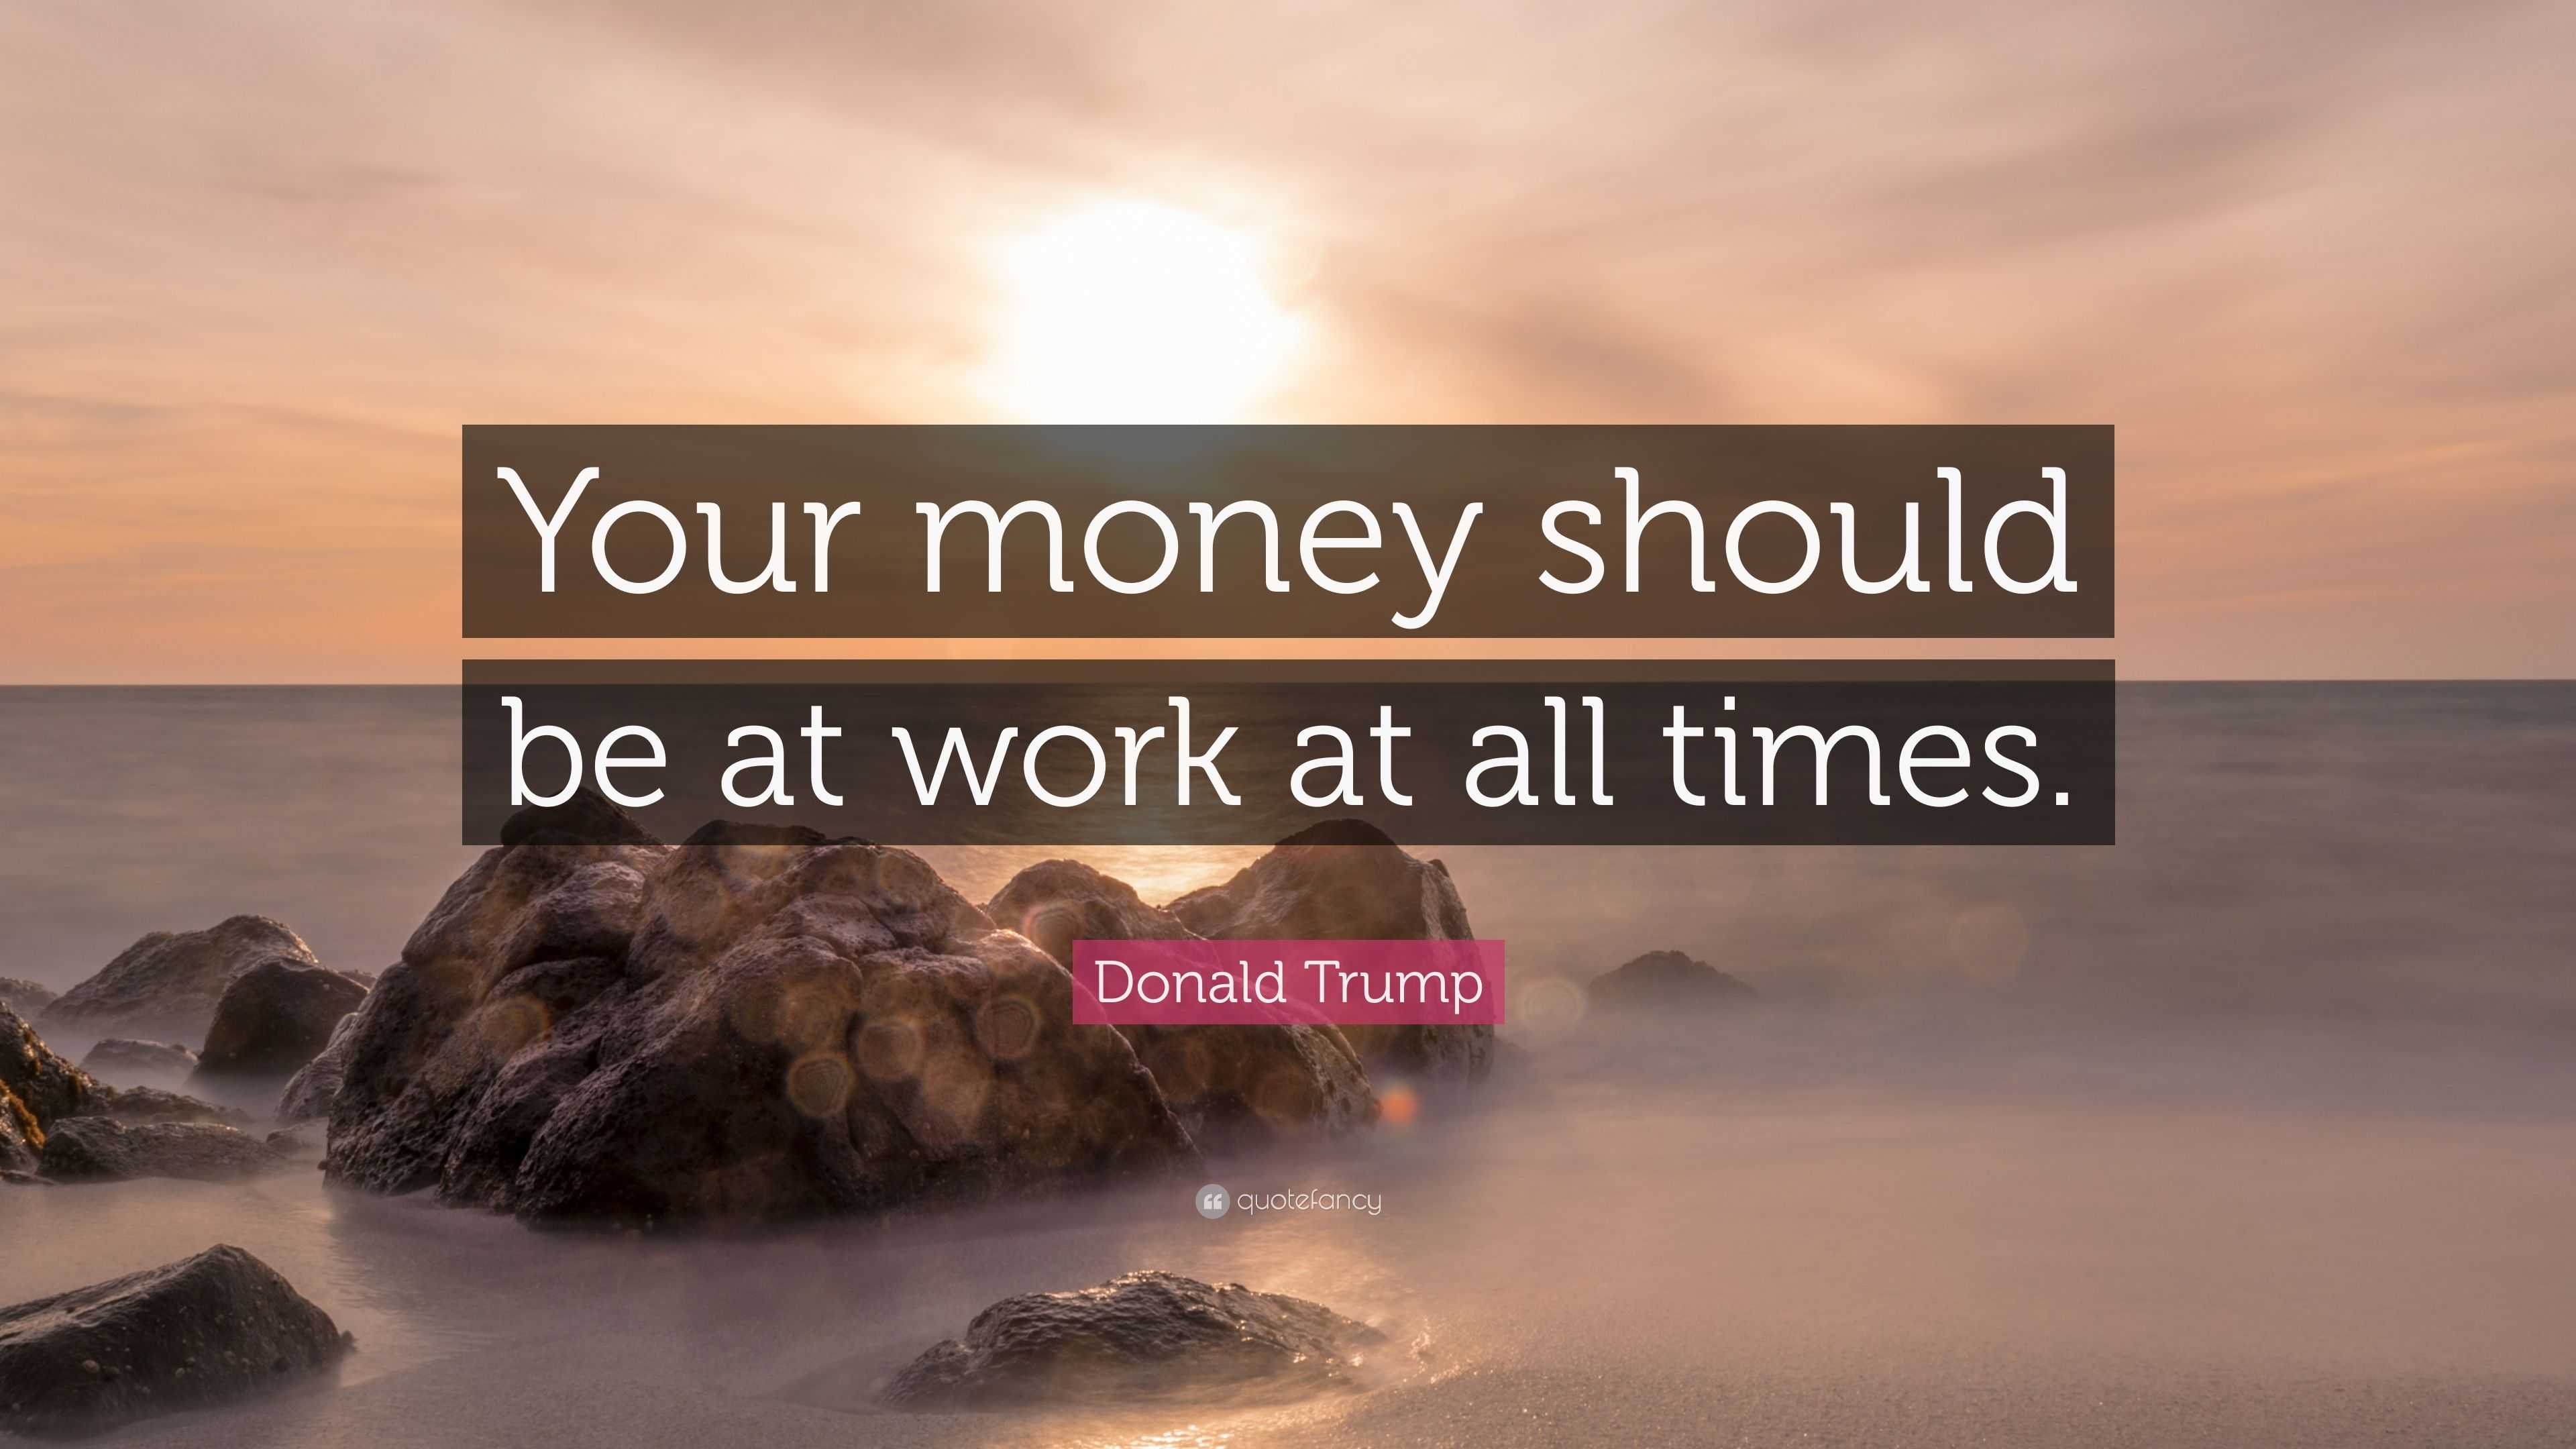 Donald Trump Quote: “Your money should be at work at all times.”